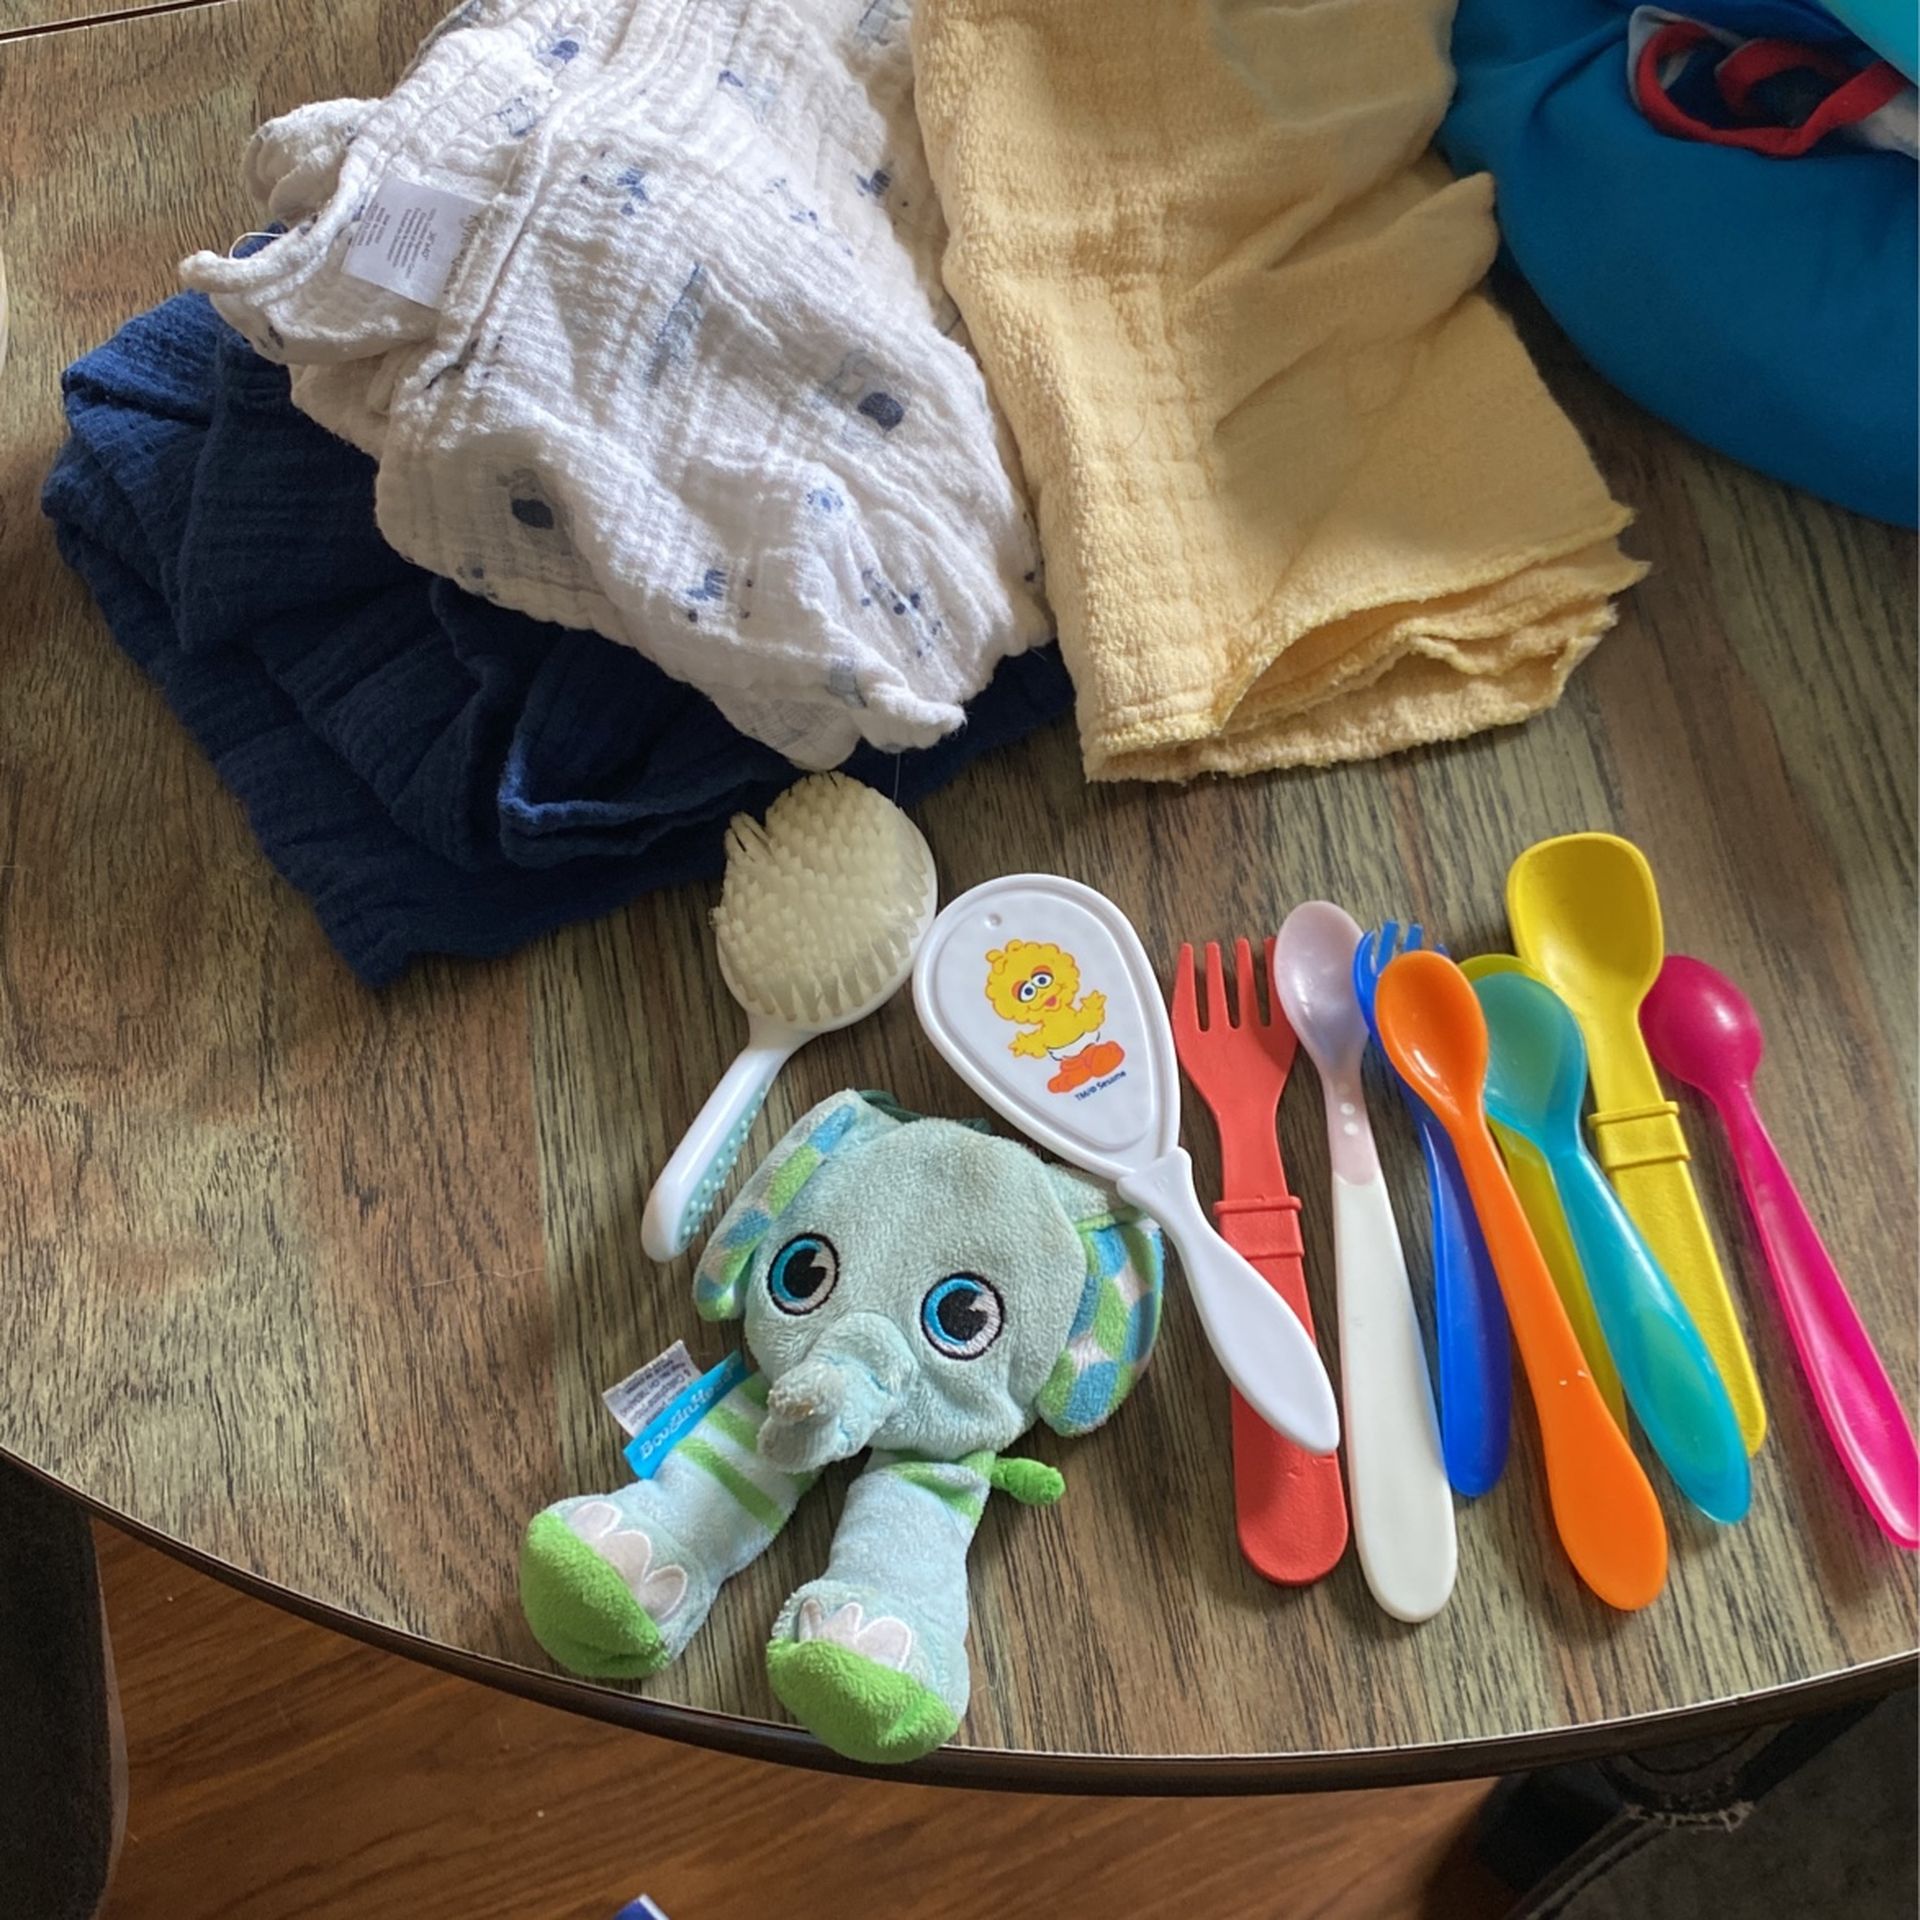 Assorted baby Items 